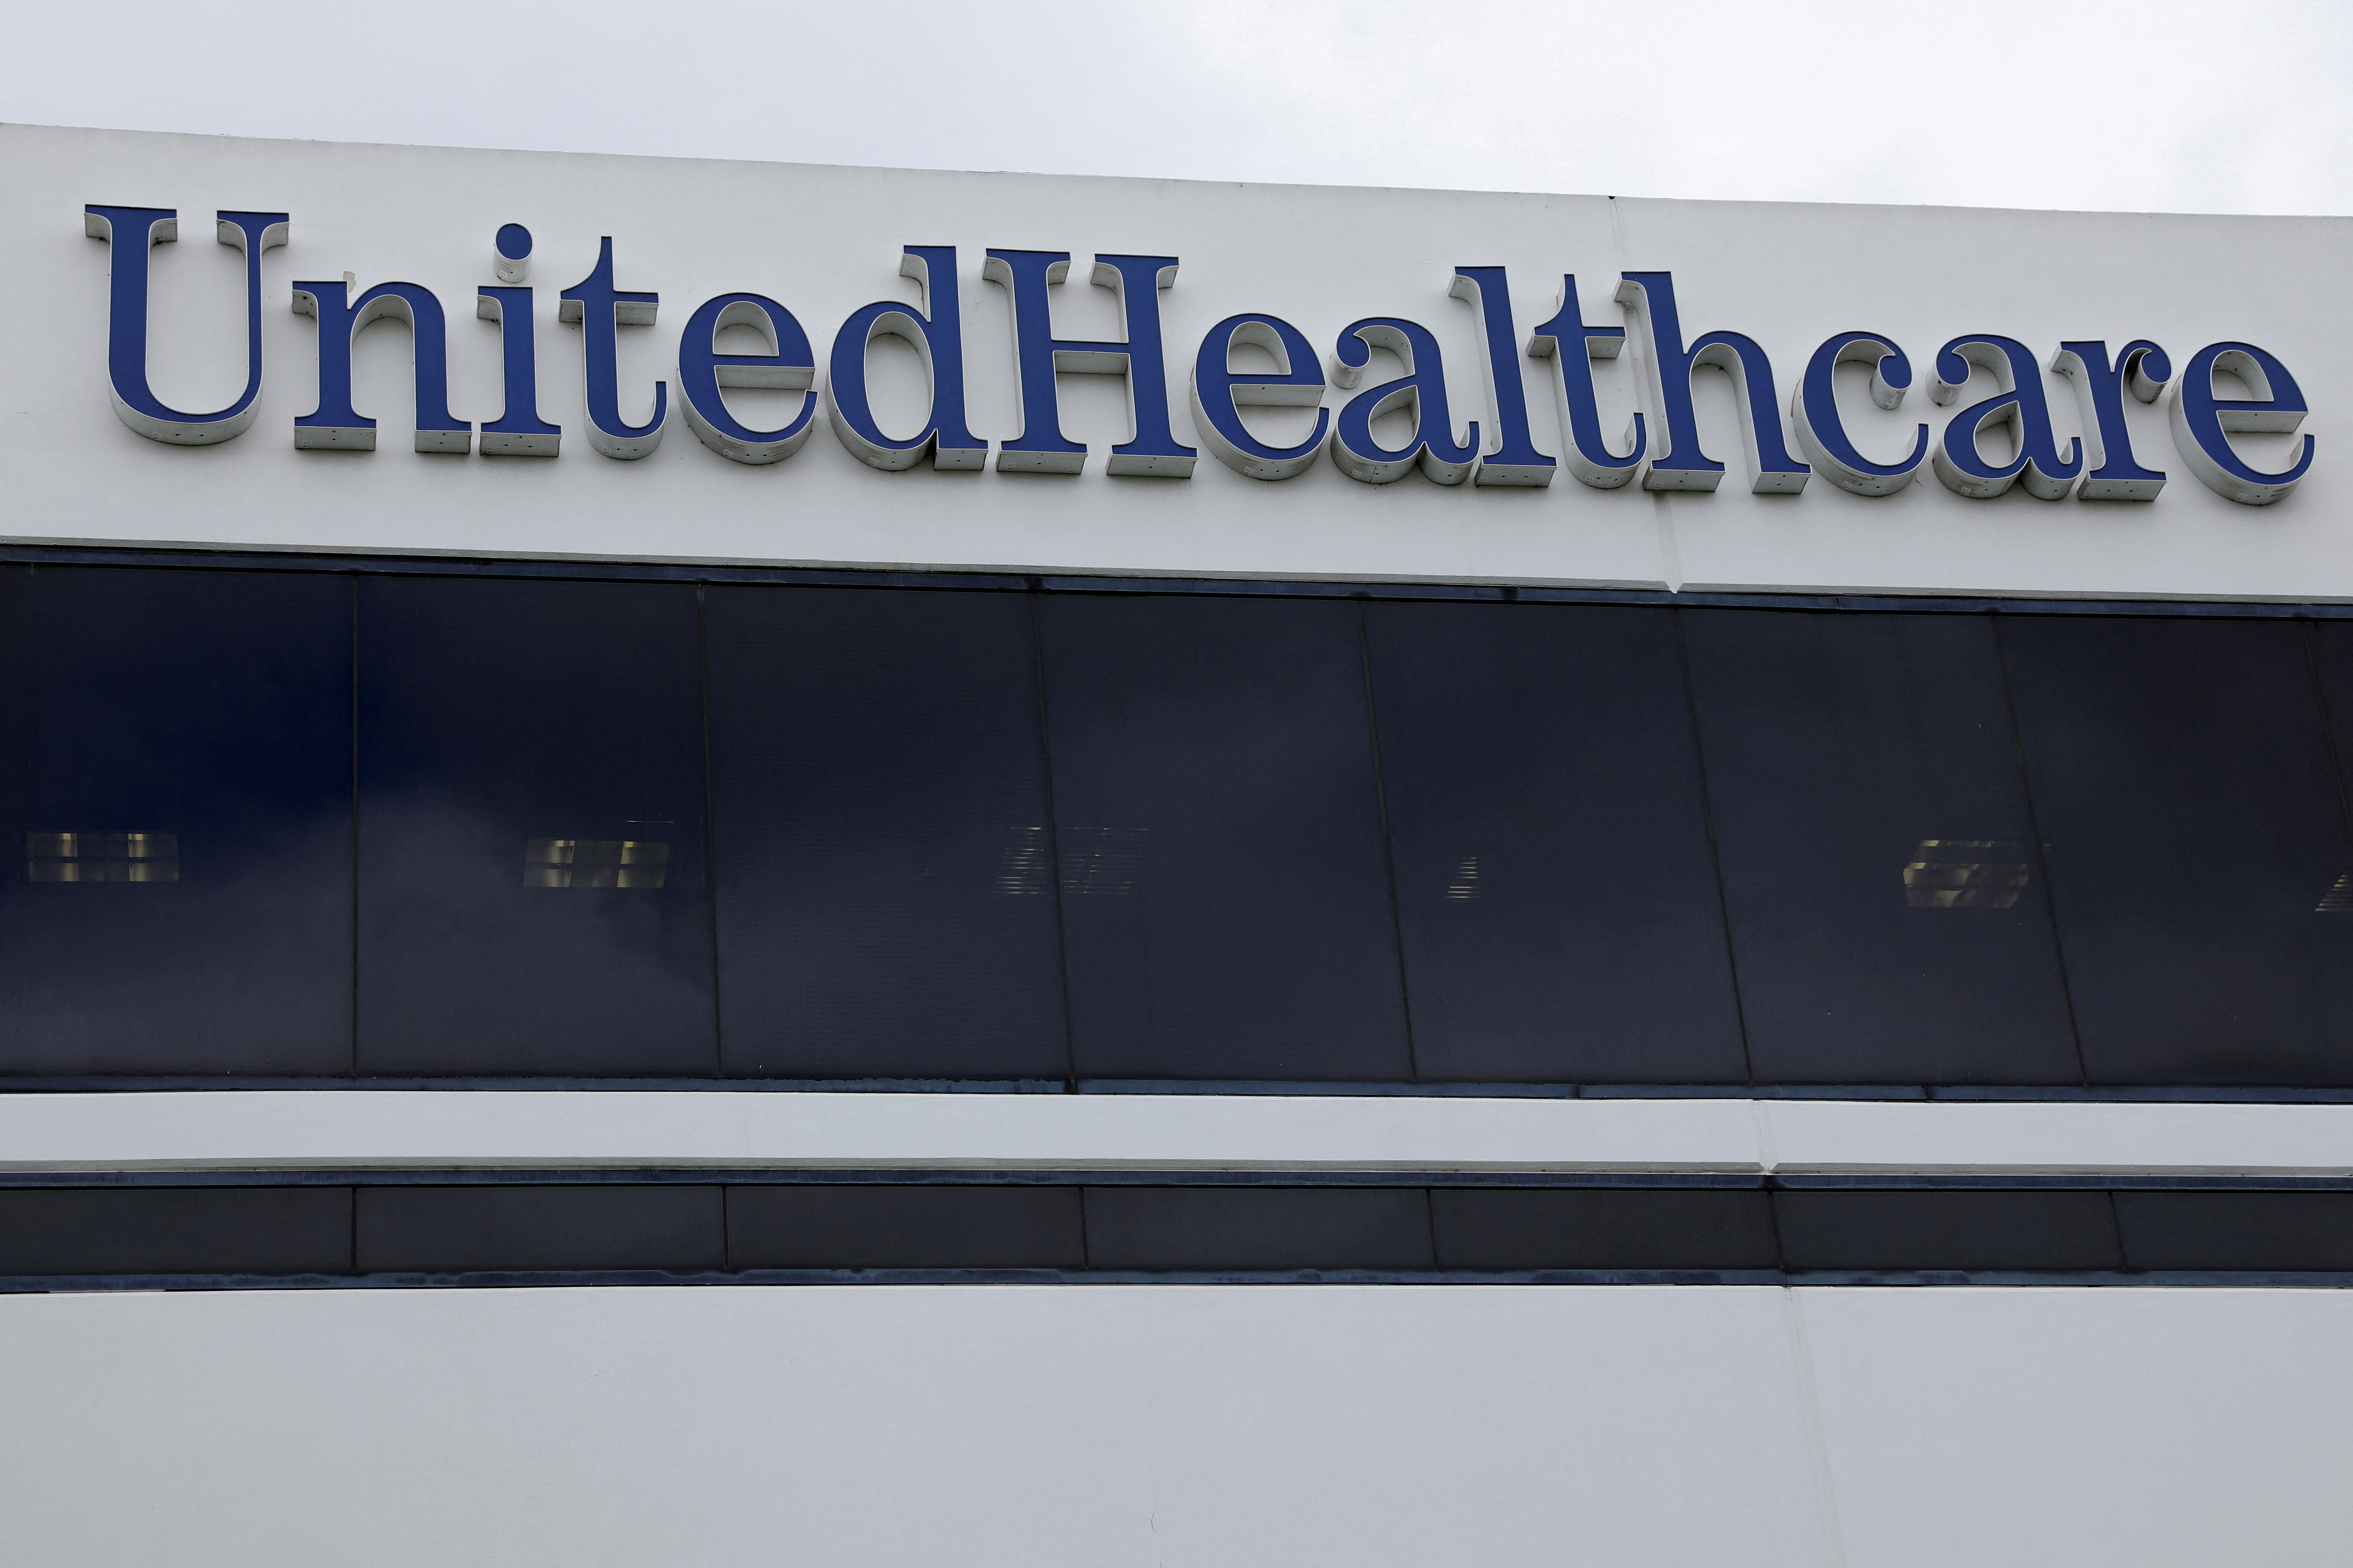 The corporate logo of the UnitedHealth Group appears on the side of one of their office buildings in Santa Ana, California